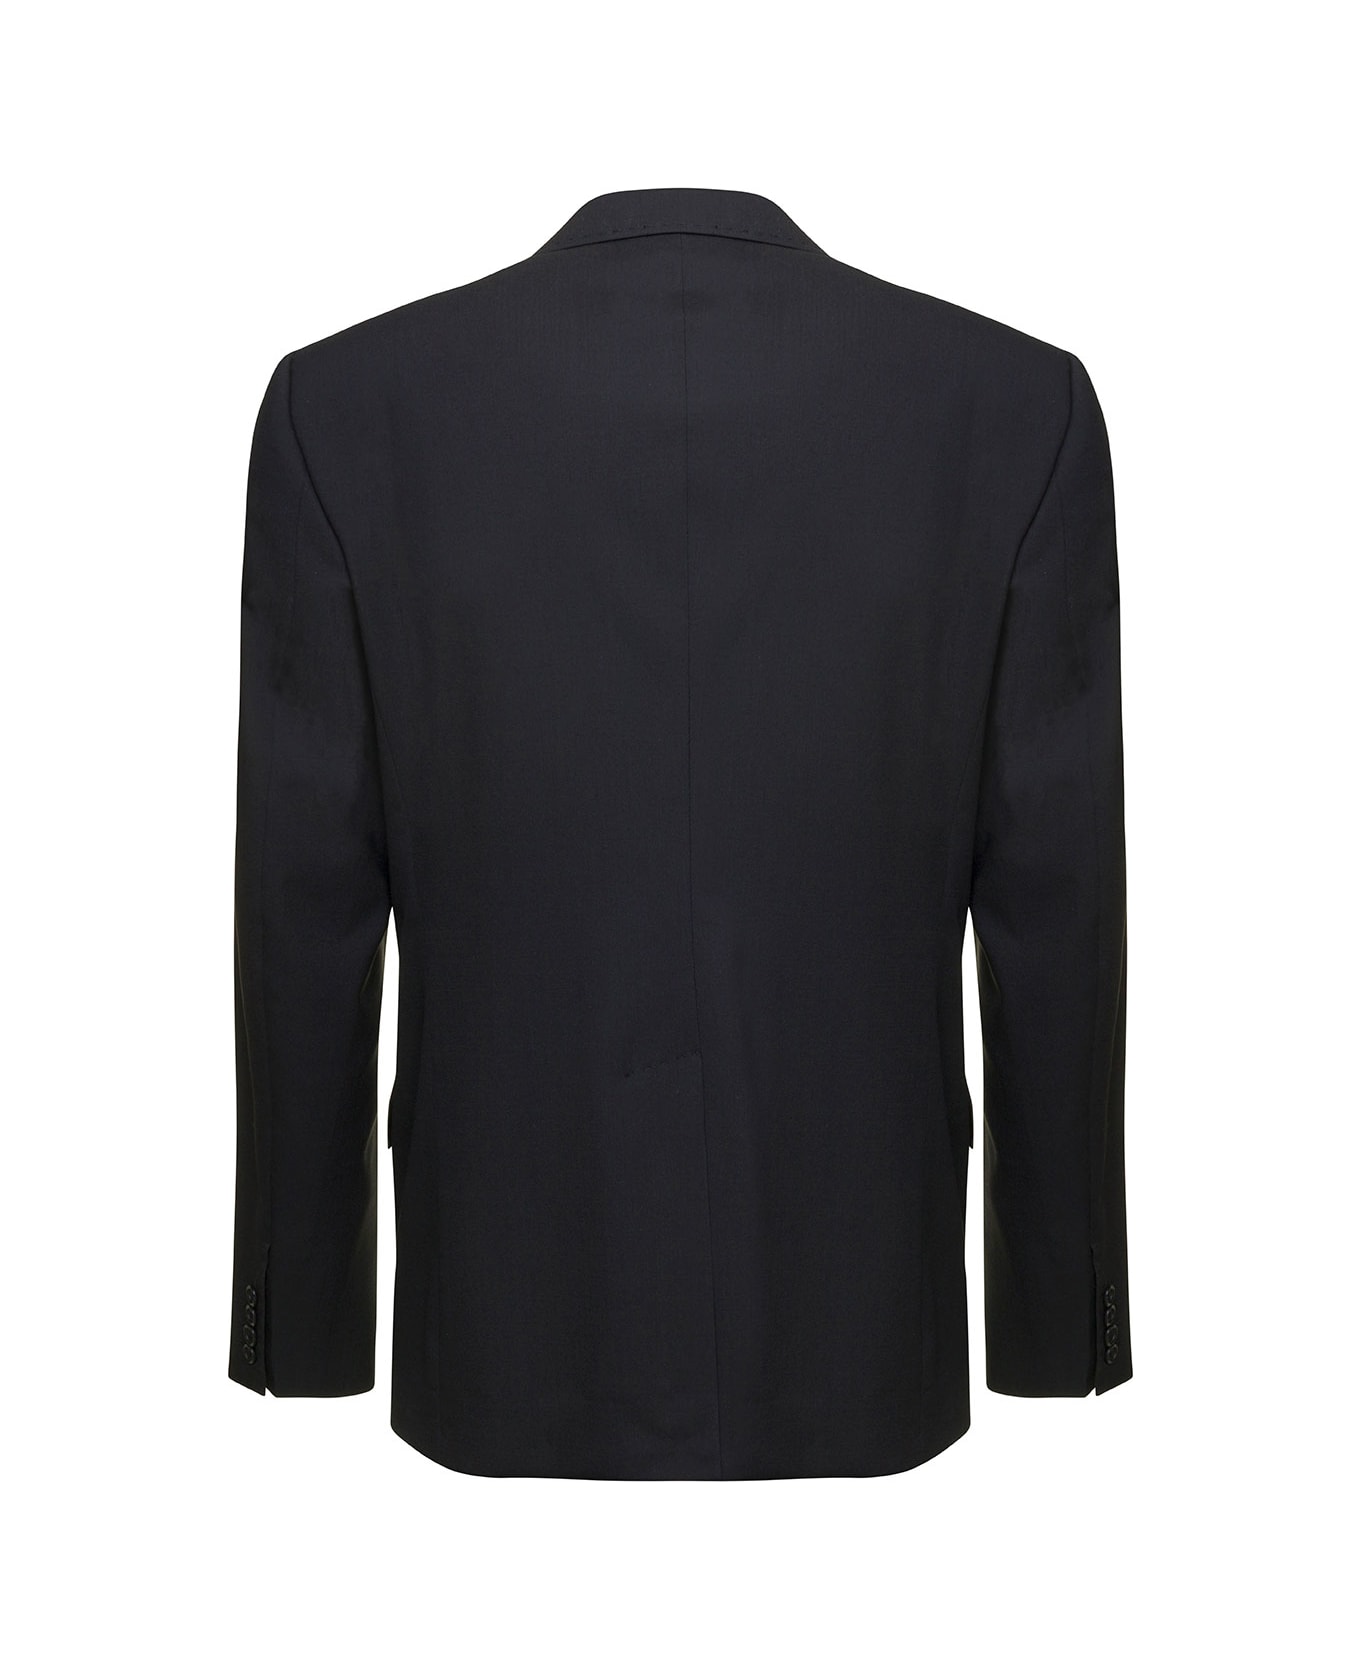 Dolce & Gabbana 'new Sicilia' Black Single-breasted Jacket With Concelaed Fastening In Stretch Wool Man - Black ブレザー